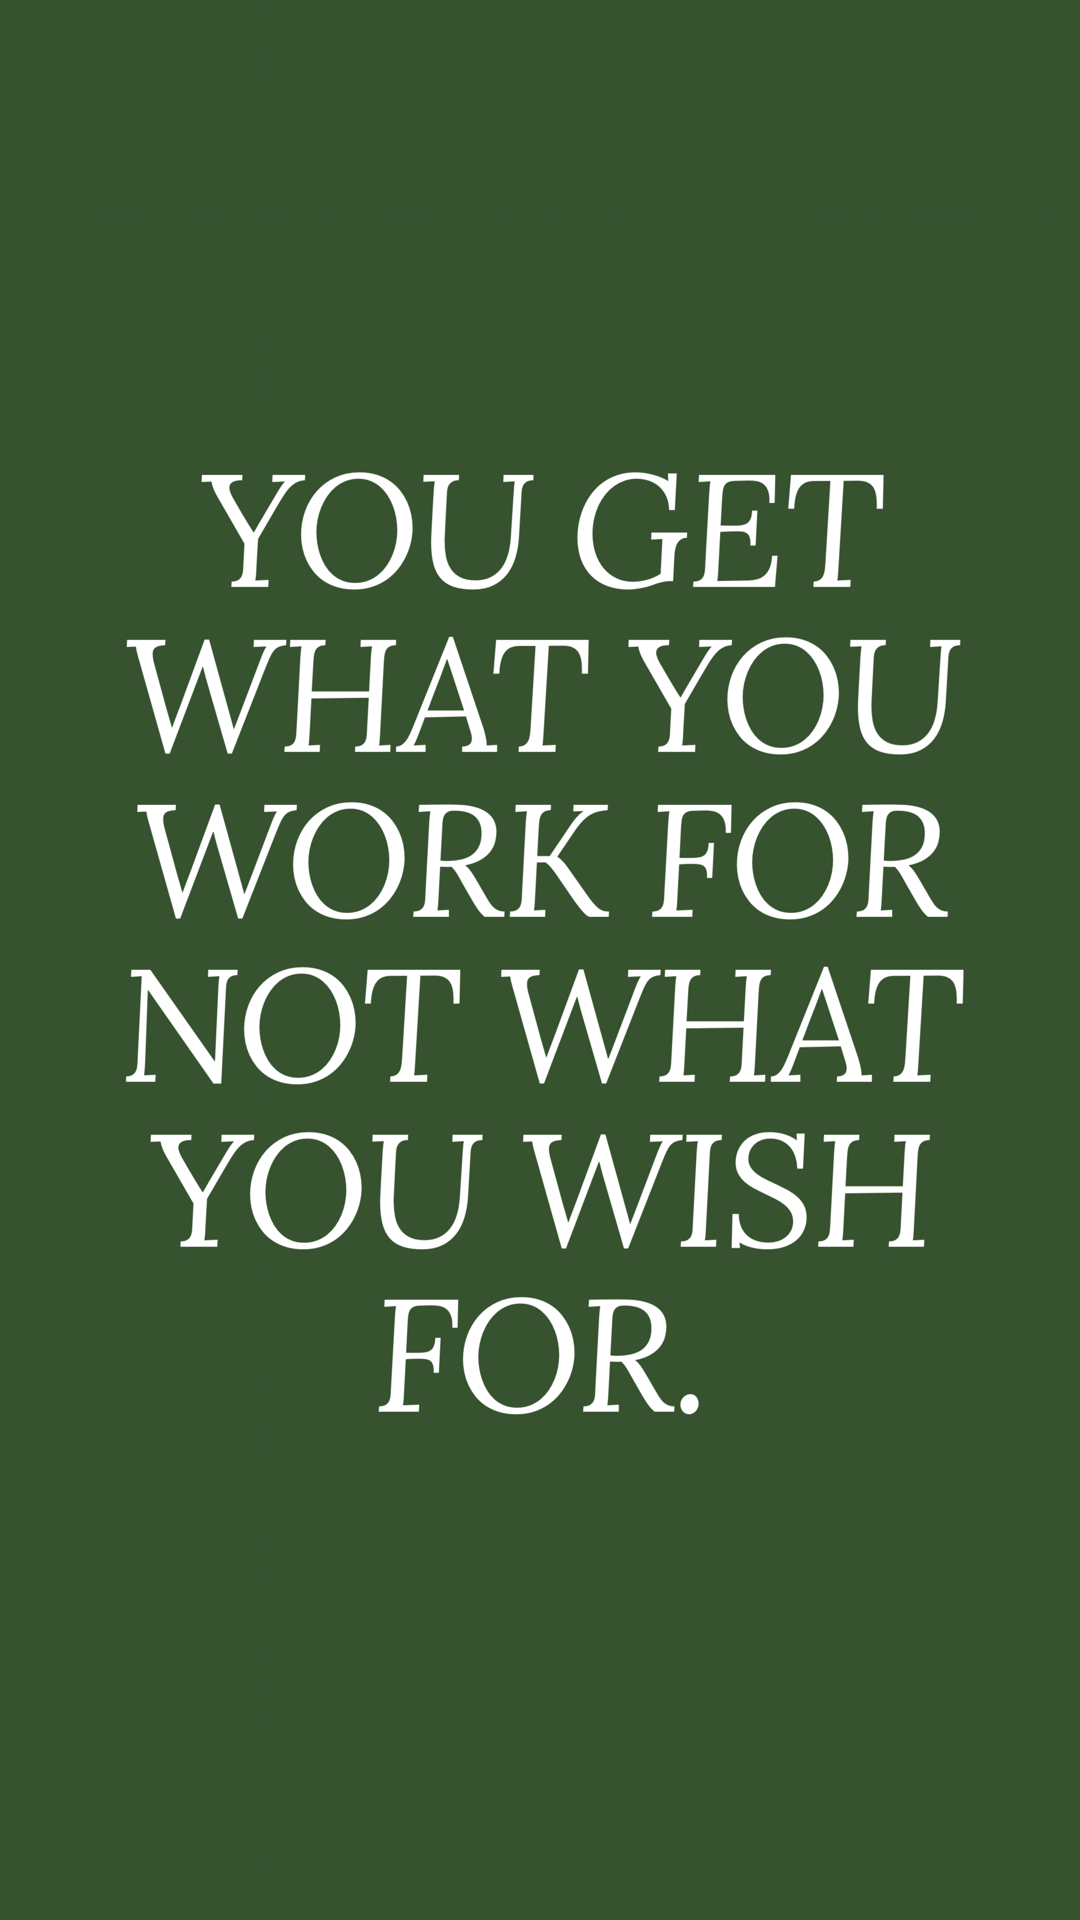 you get what you work for not what you wish for.